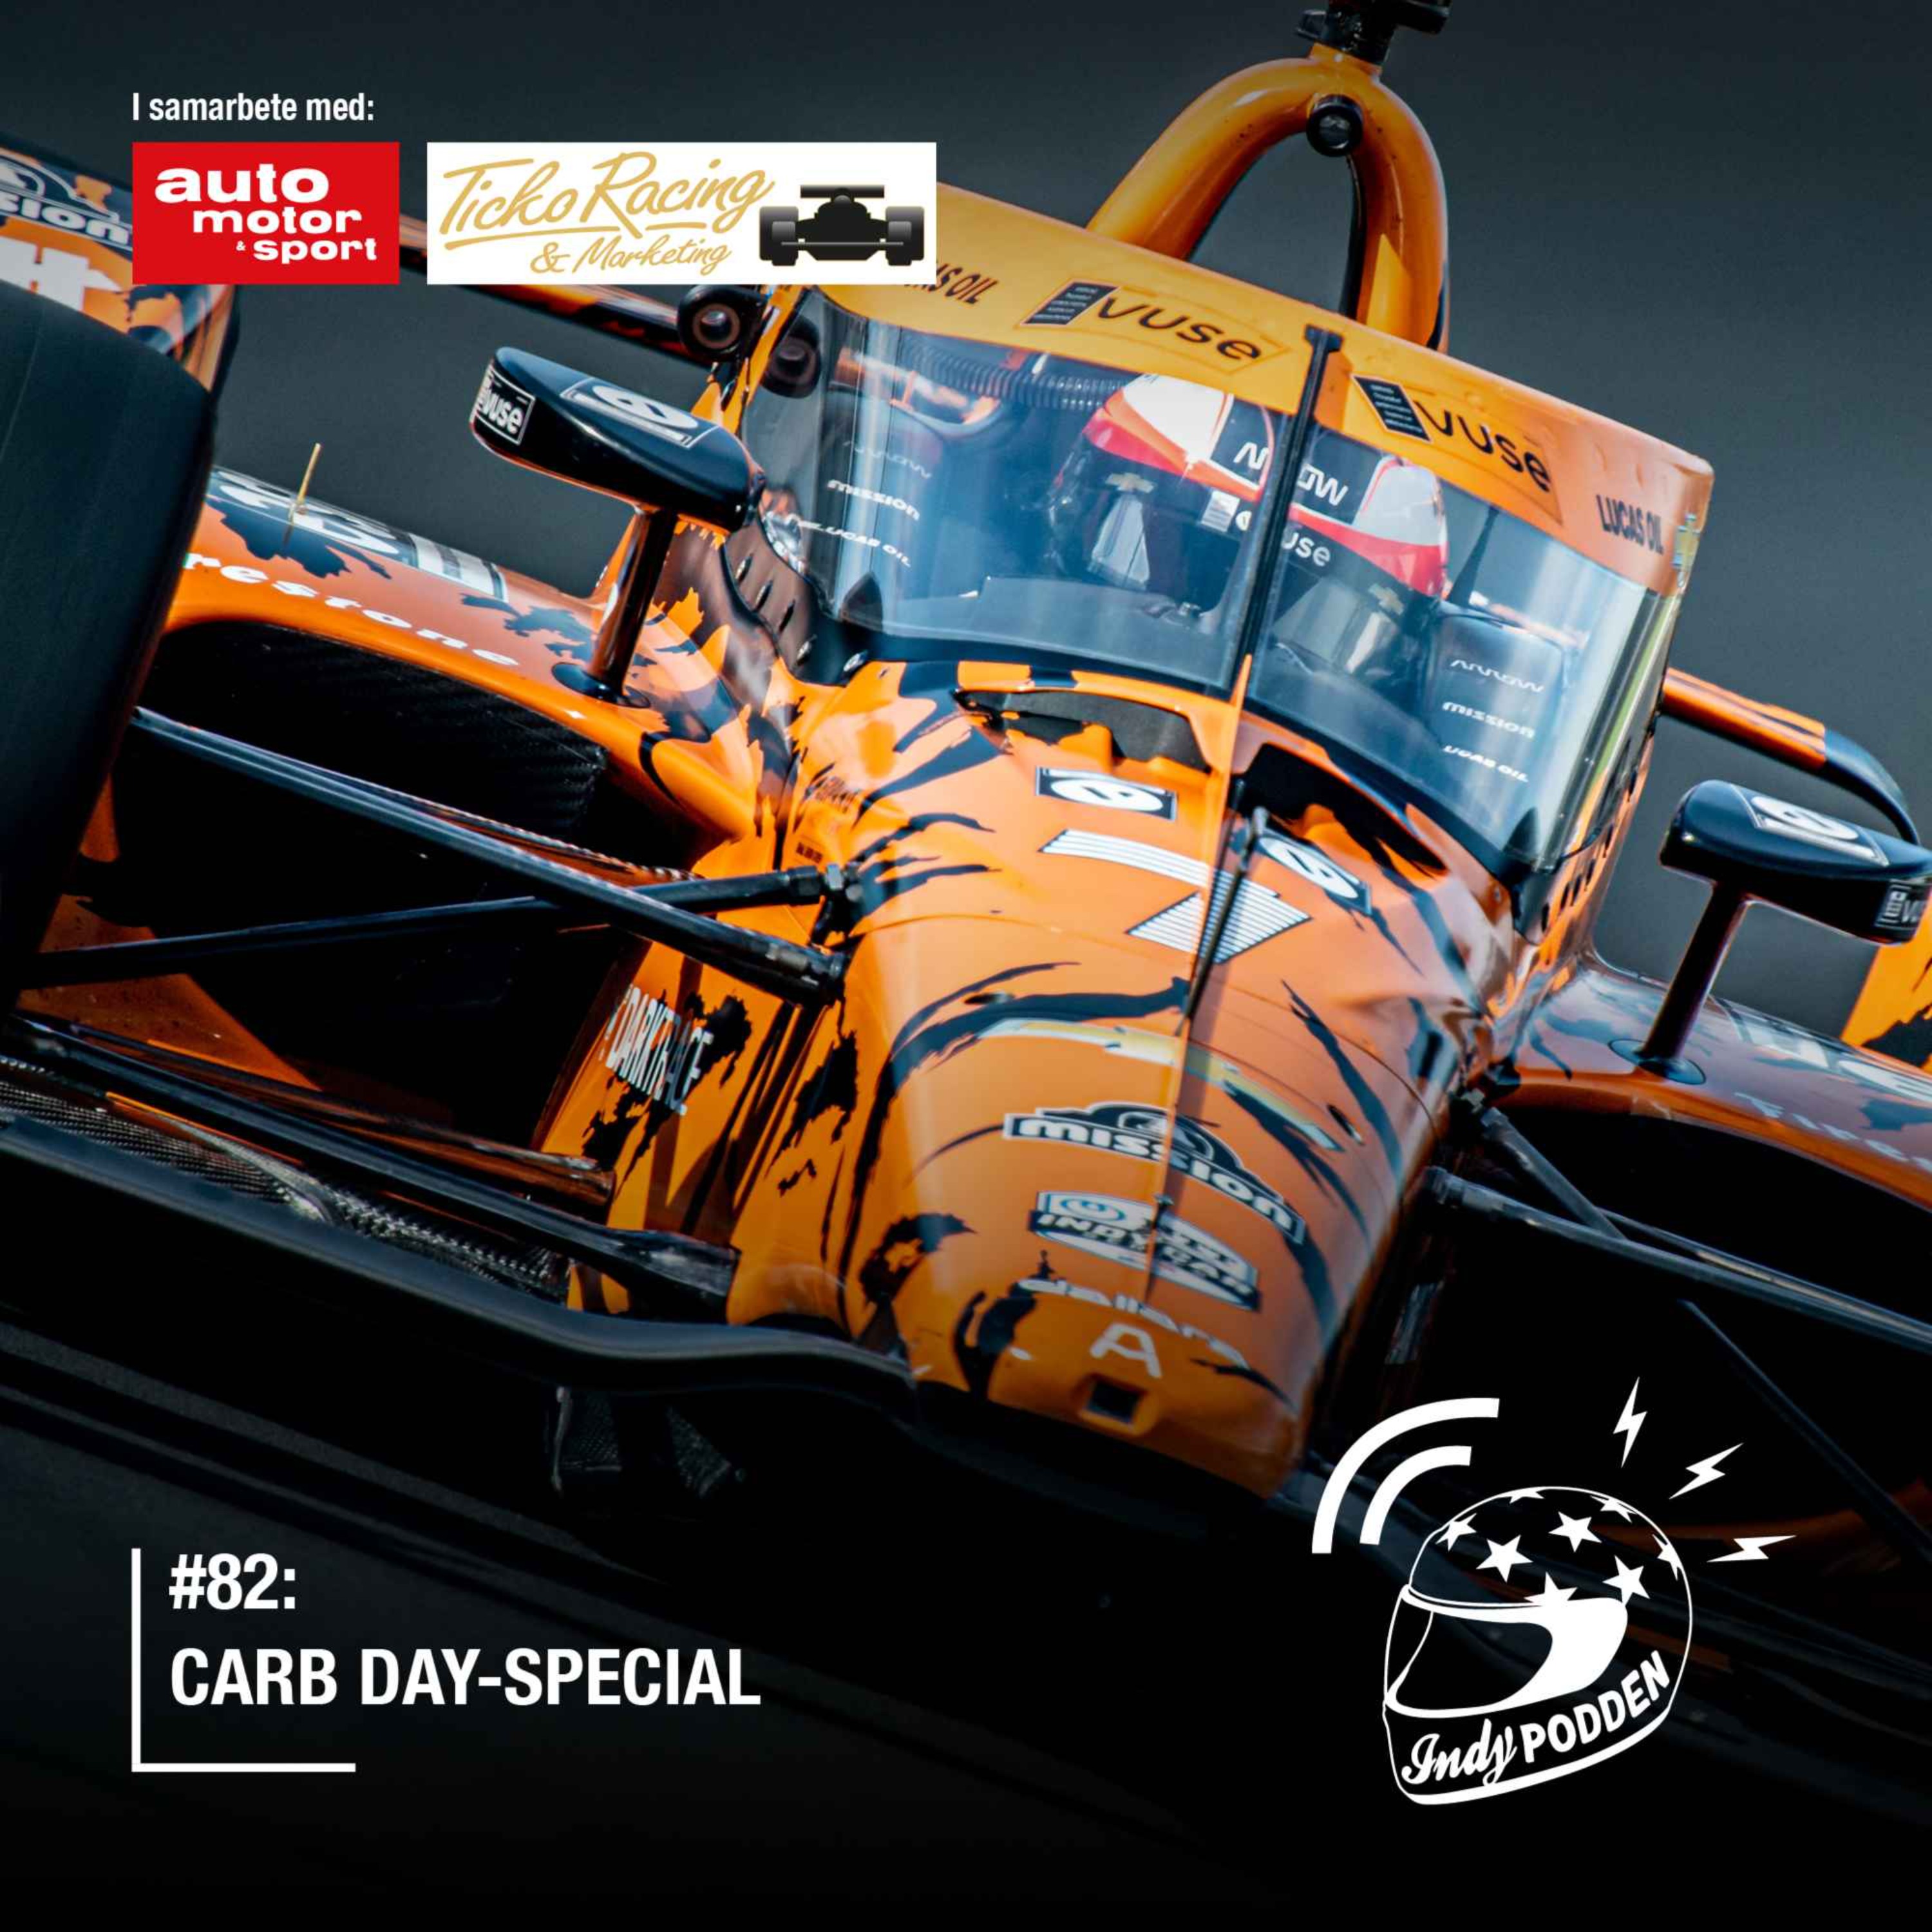 #82: Carb Day-special